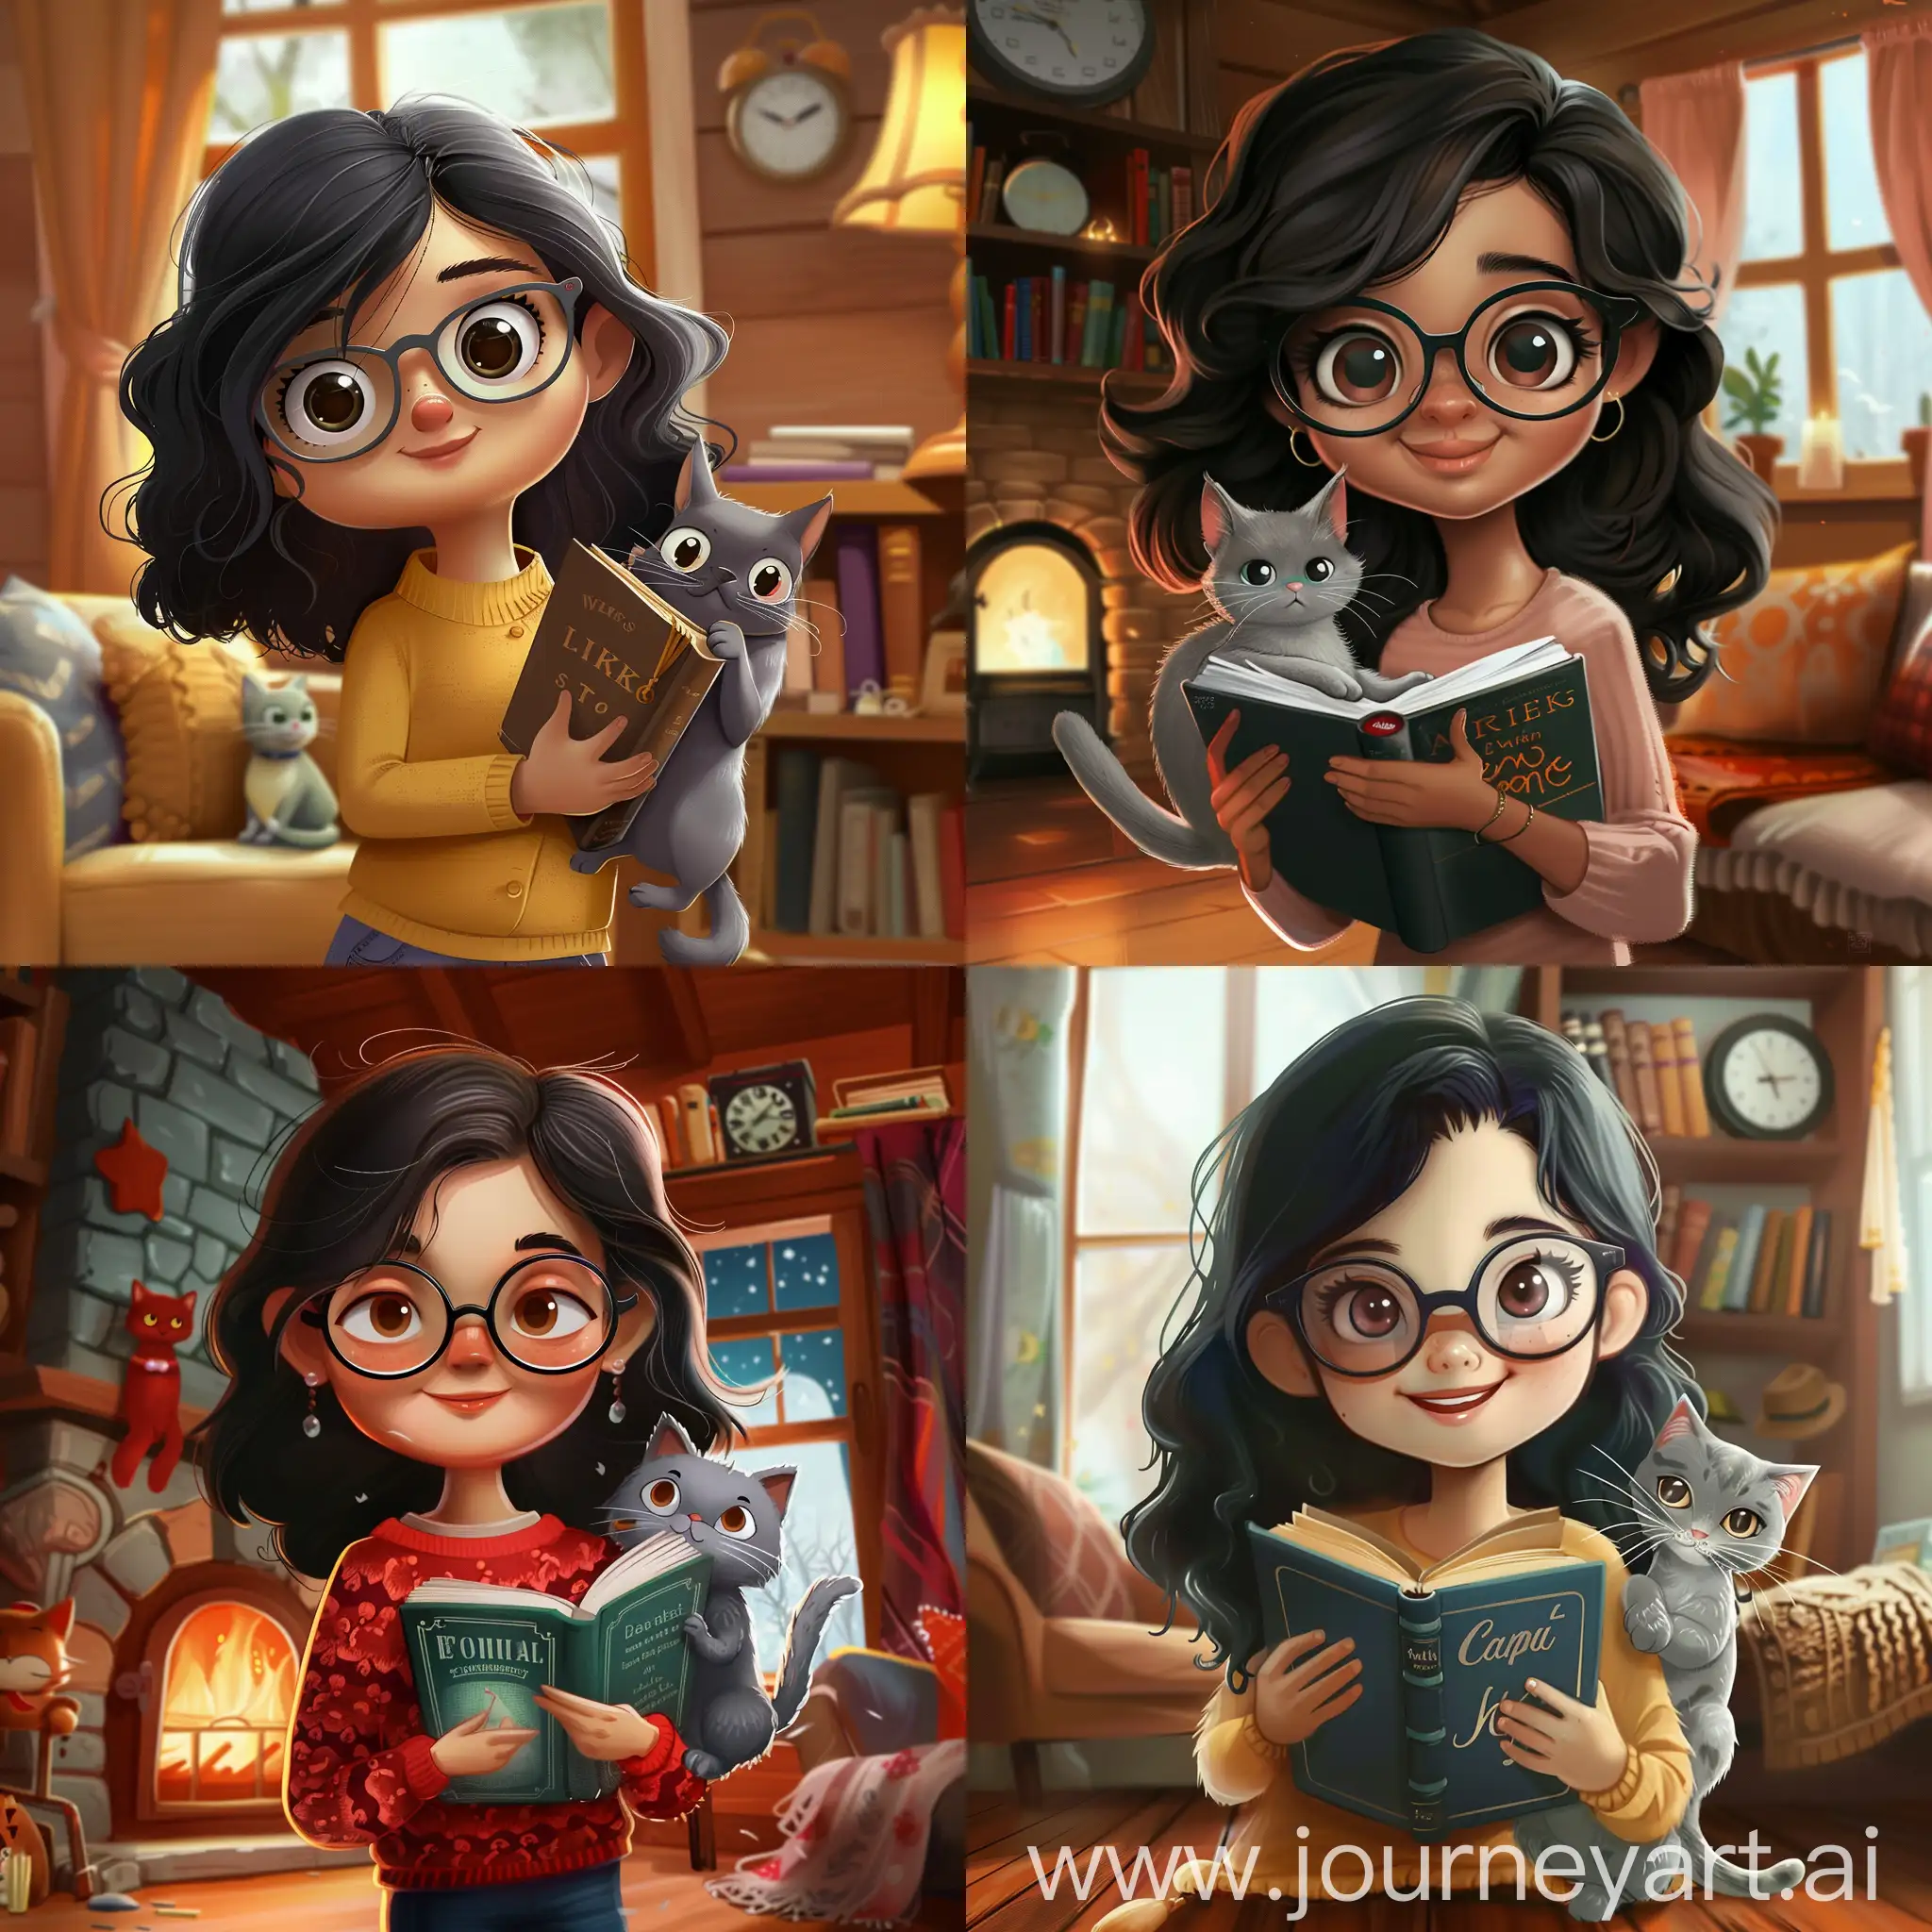 cartoon girl with dark hair and glasses with grey cat holding English book in a cozy room 